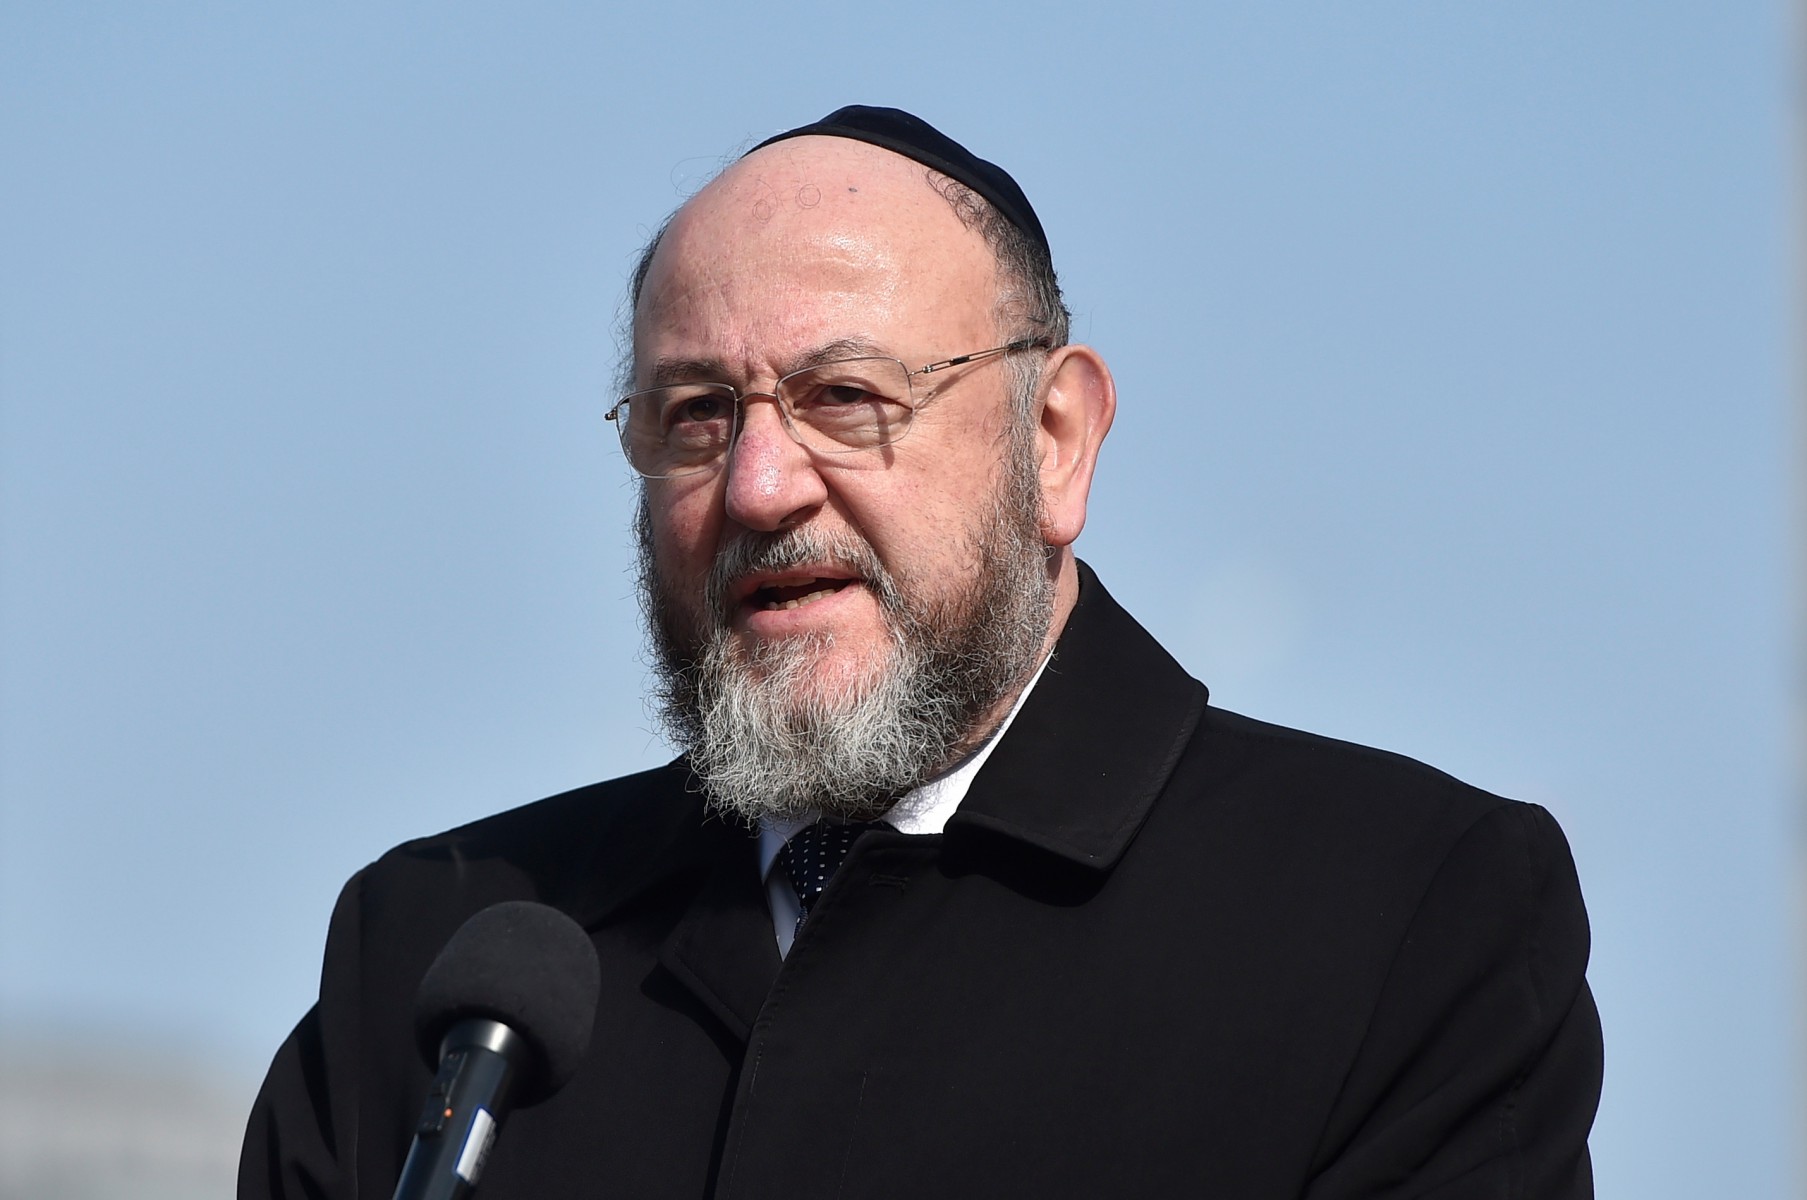  Chief Rabbi of the United Hebrew Congregations of the Commonwealth Ephraim Mirvis issues warning about a Labour win